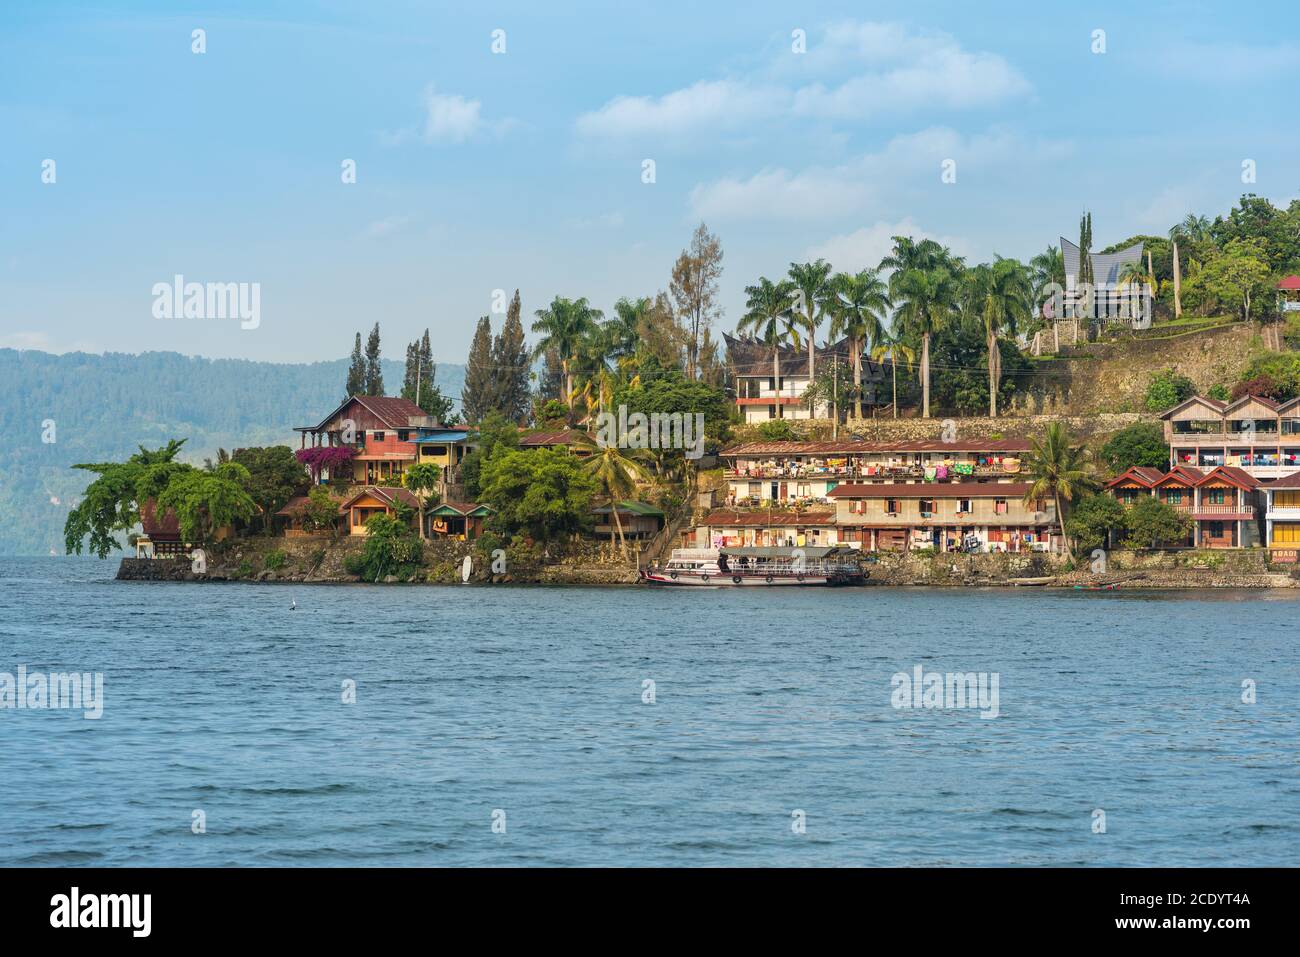 Hotels and Traveller Accommodation on the shores of Lake Toba in Sumatra Stock Photo